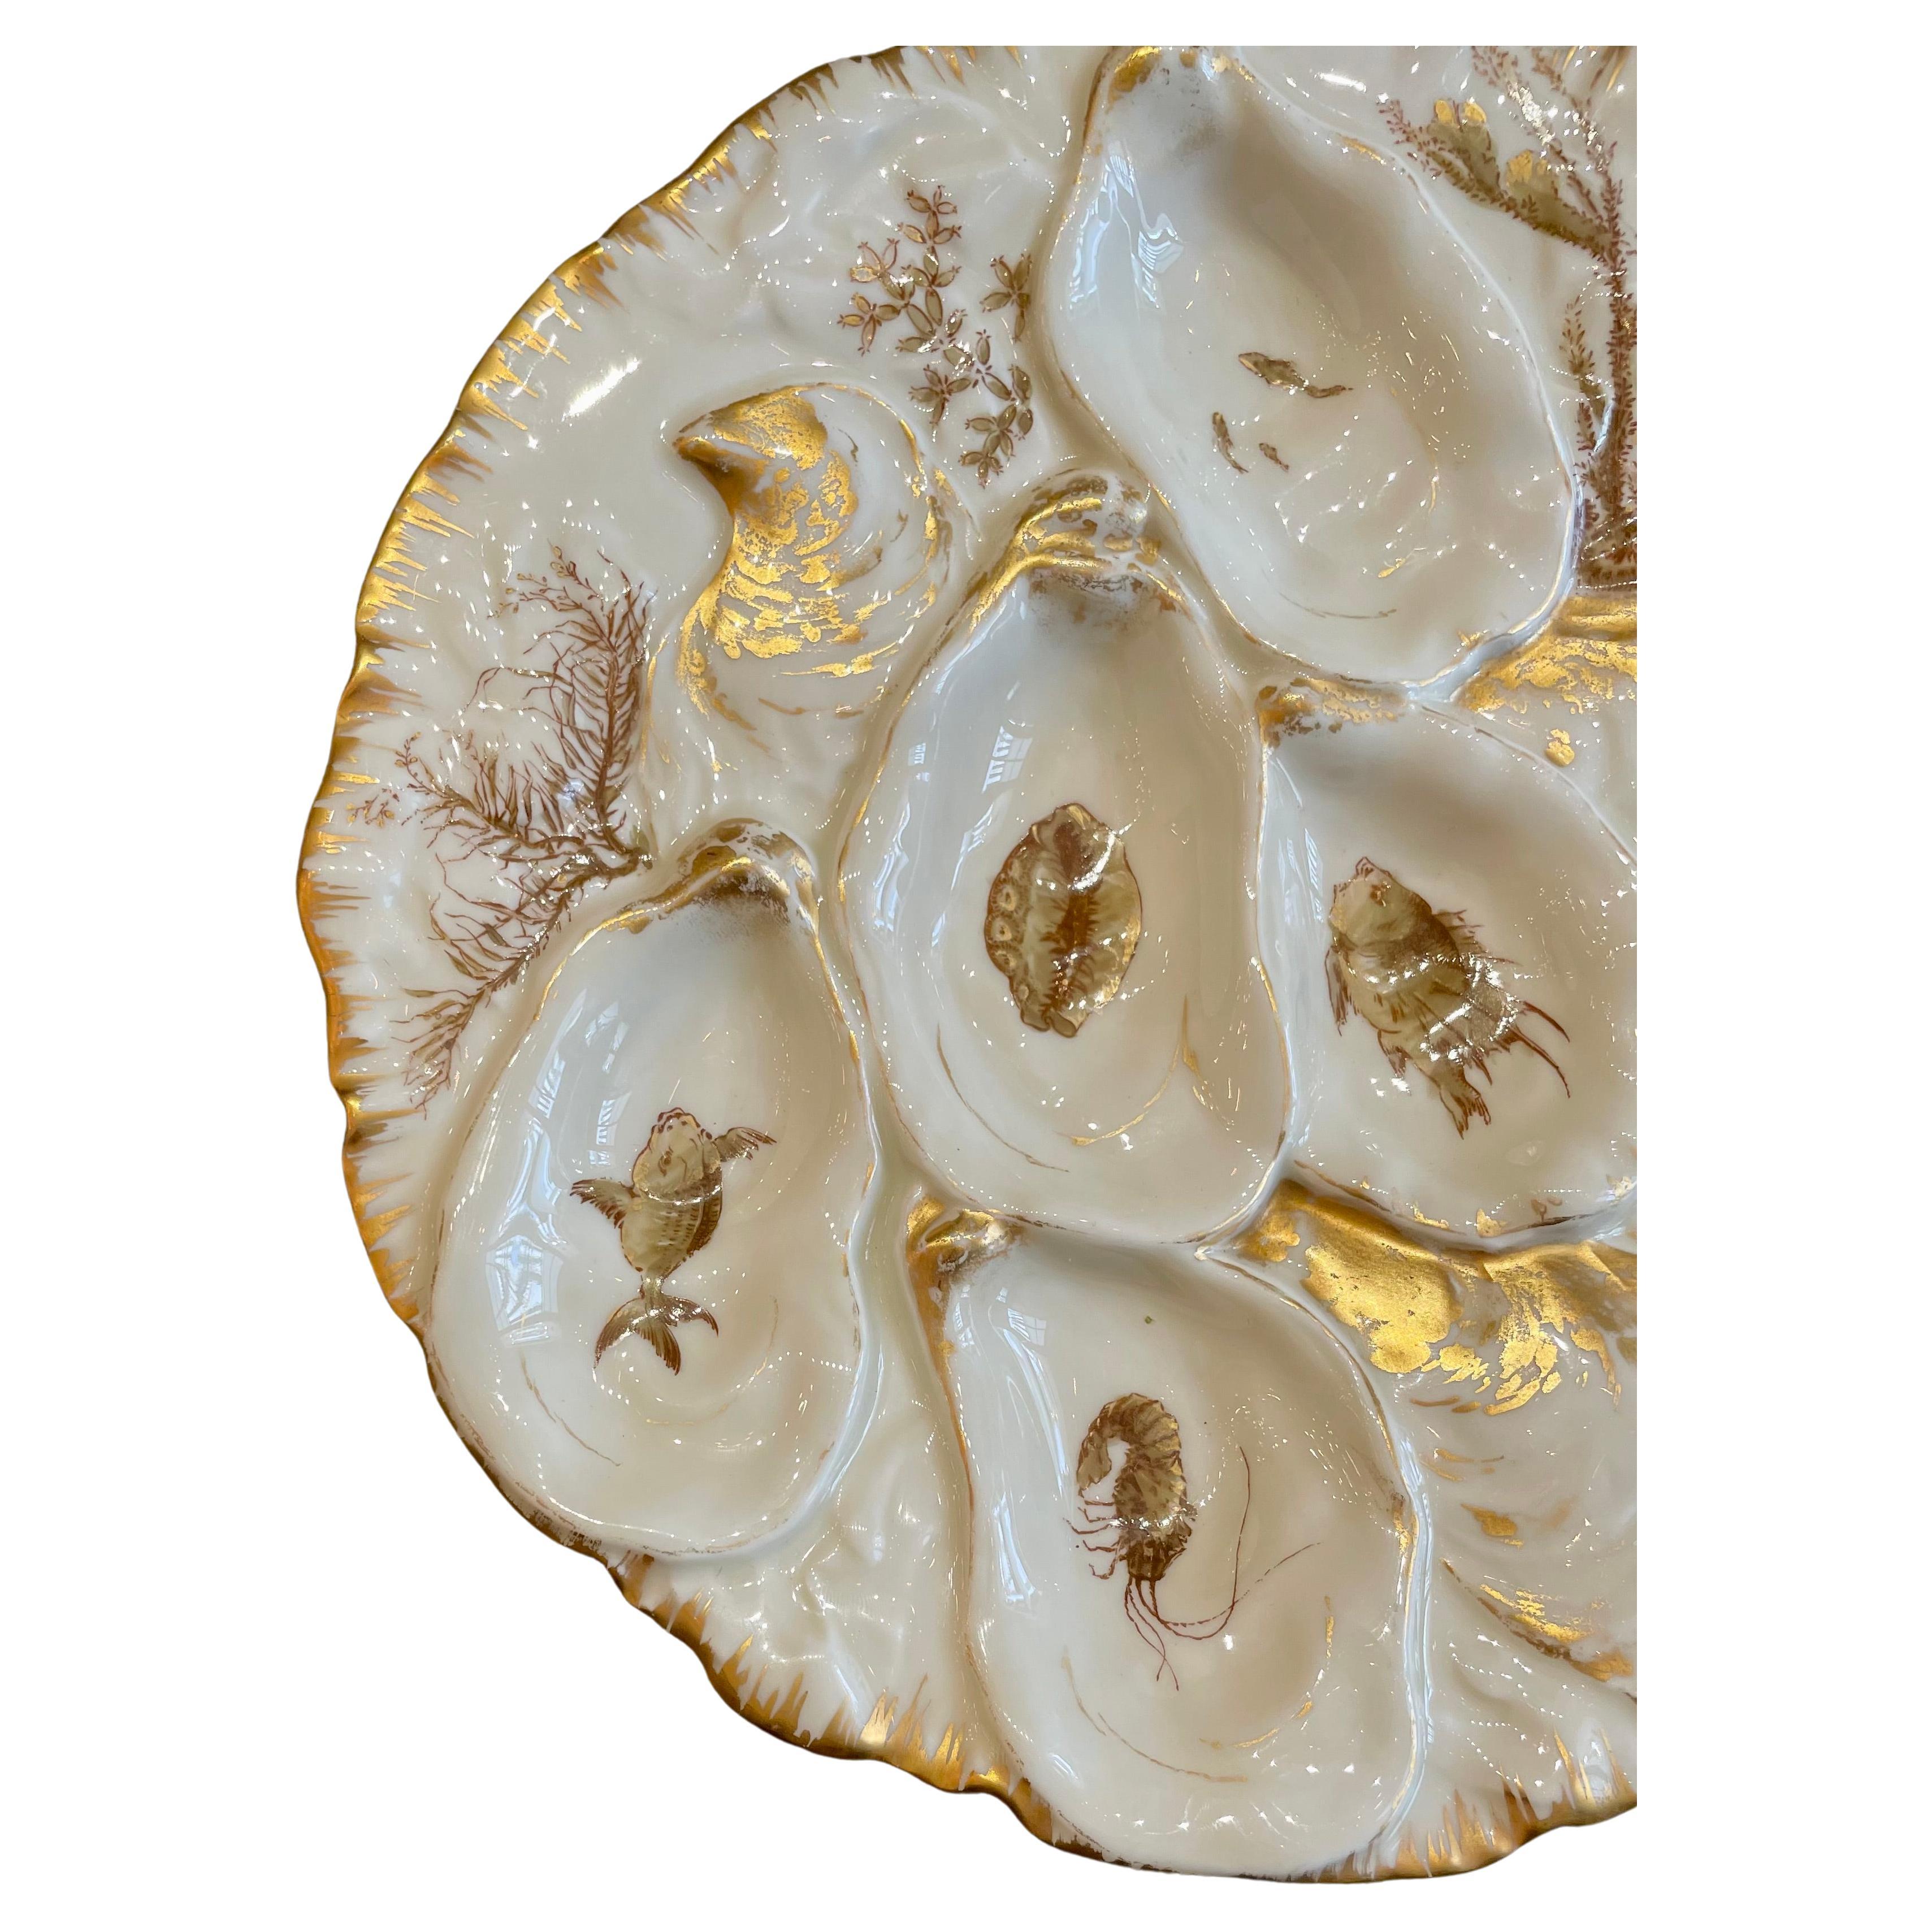 Antique French Limoges Porcelain Painted Sea-Life Turkey Pattern Oyster Plate.
Hand-Painted gold details on an ivory background with fish, crayfish, seashells & coral.